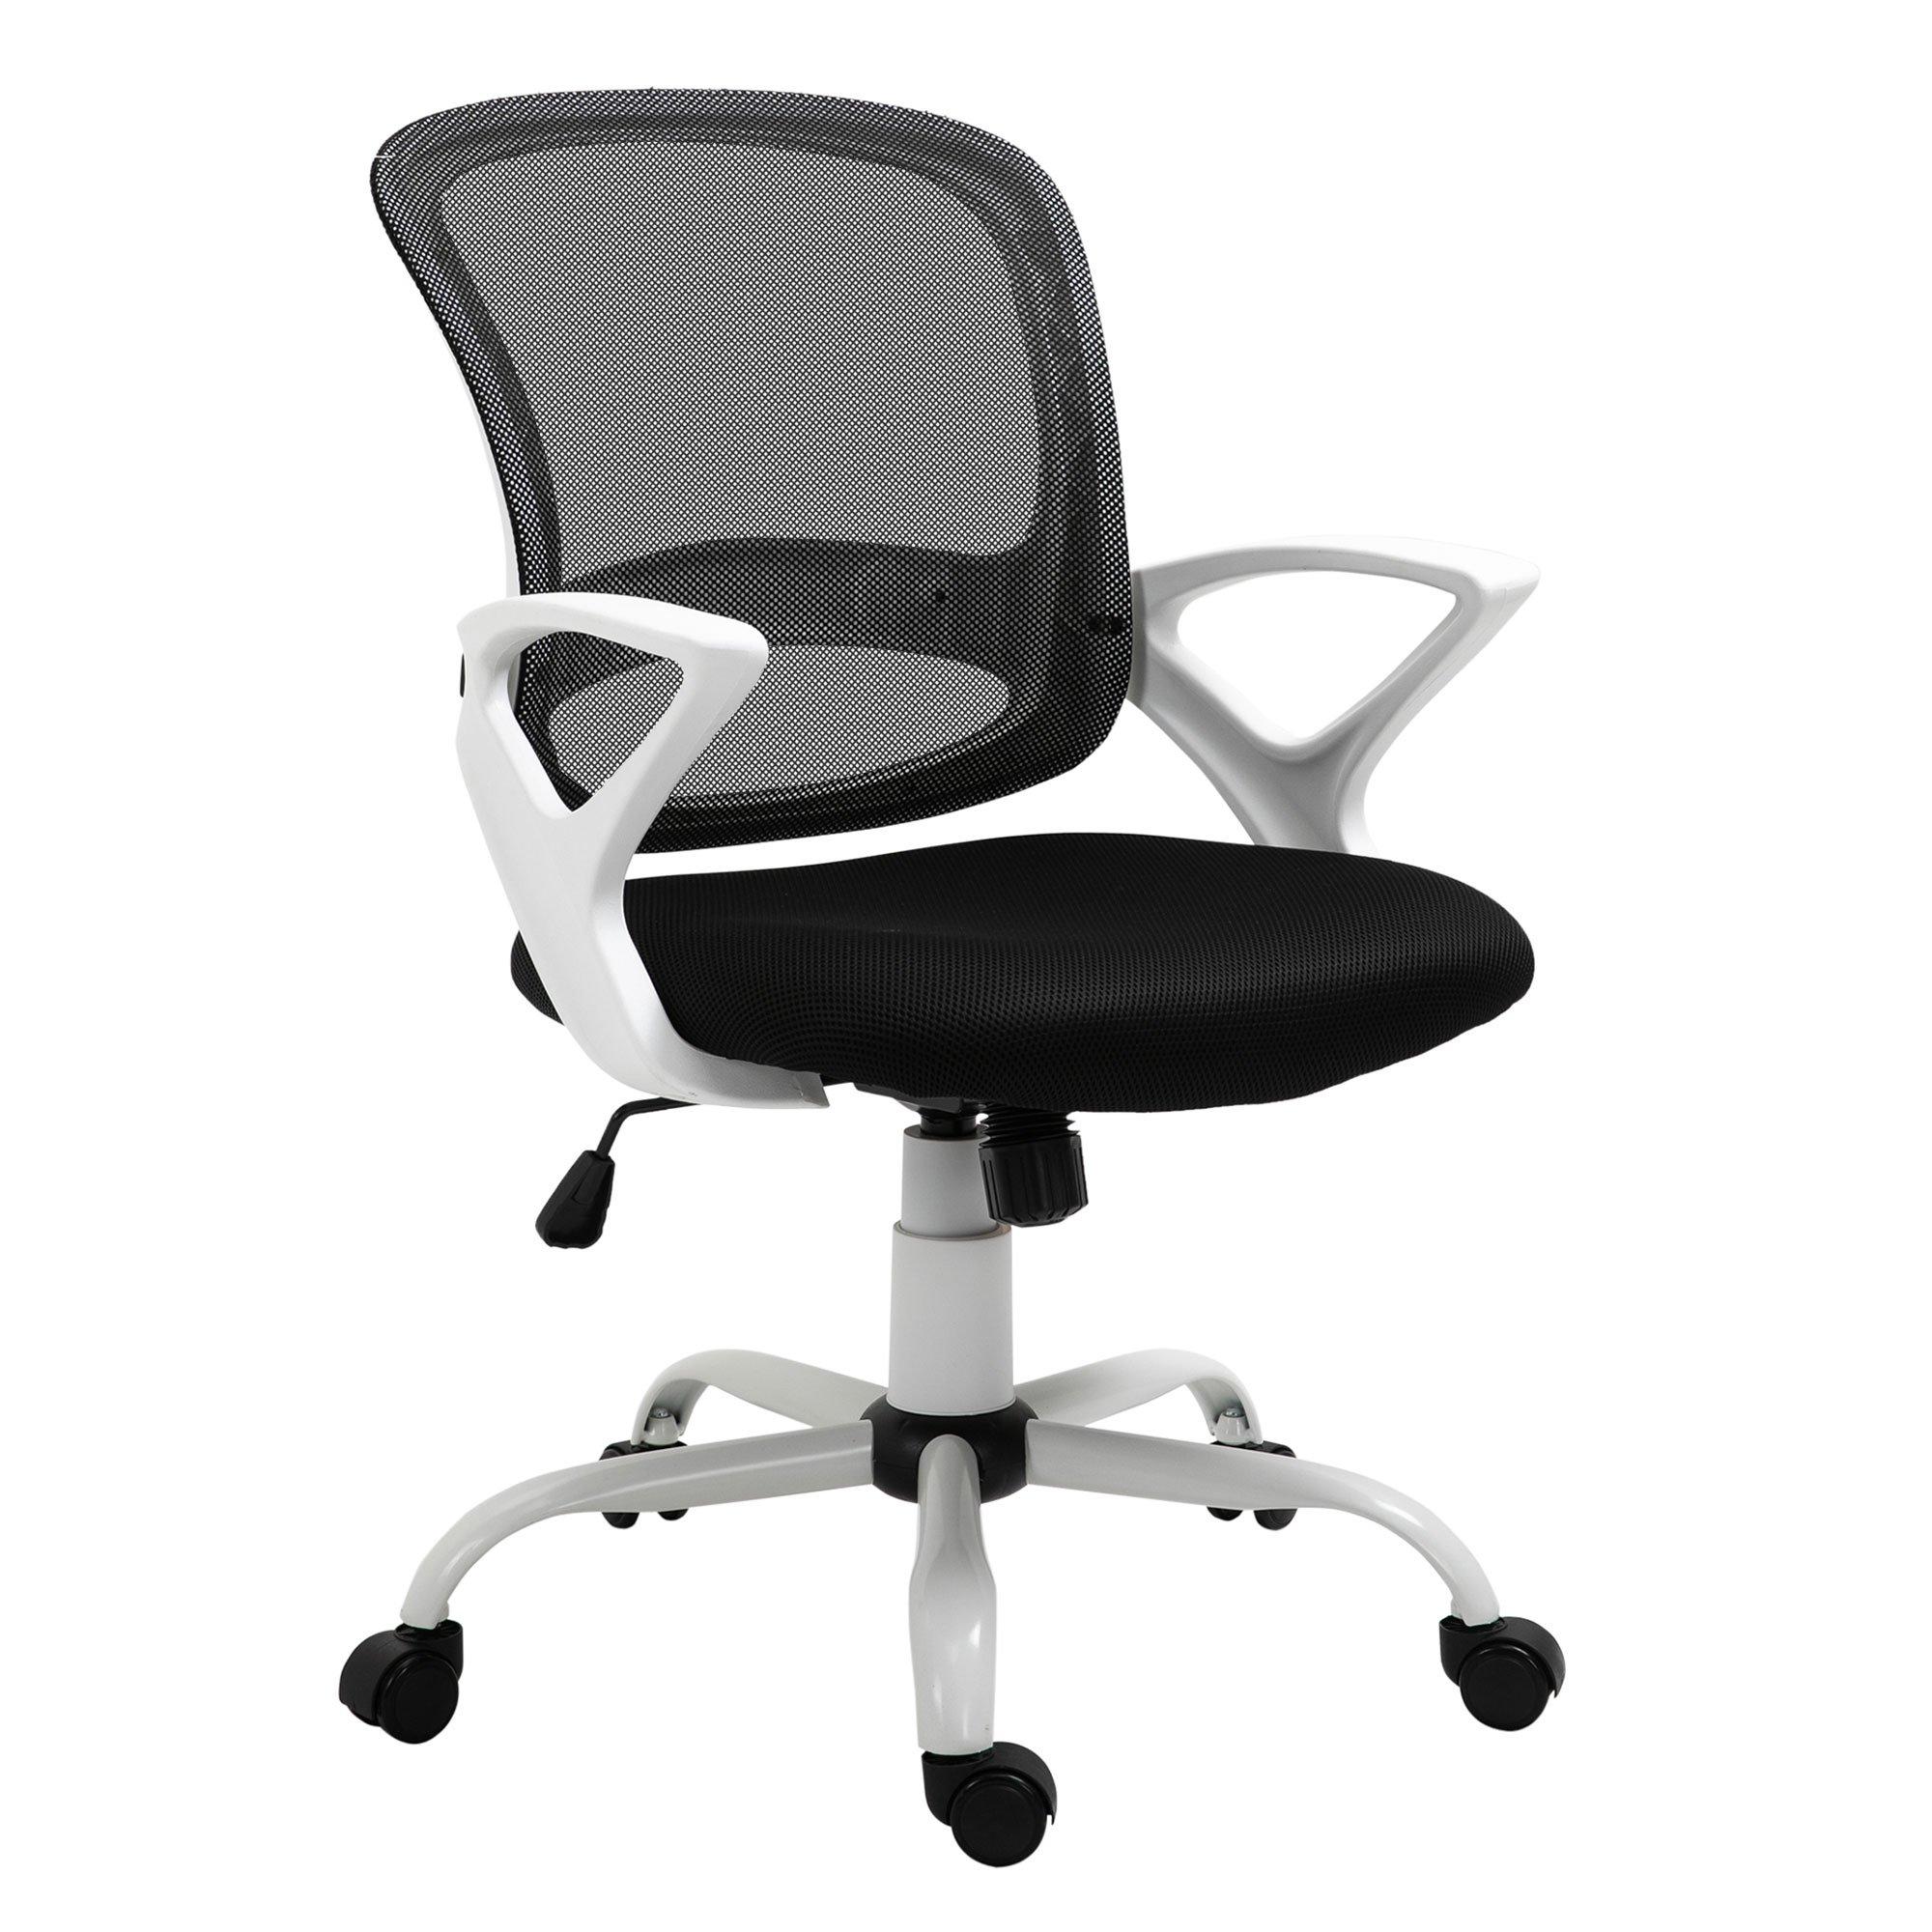 Mesh Office Chair Swivel Desk Task Computer Chair with Back Support